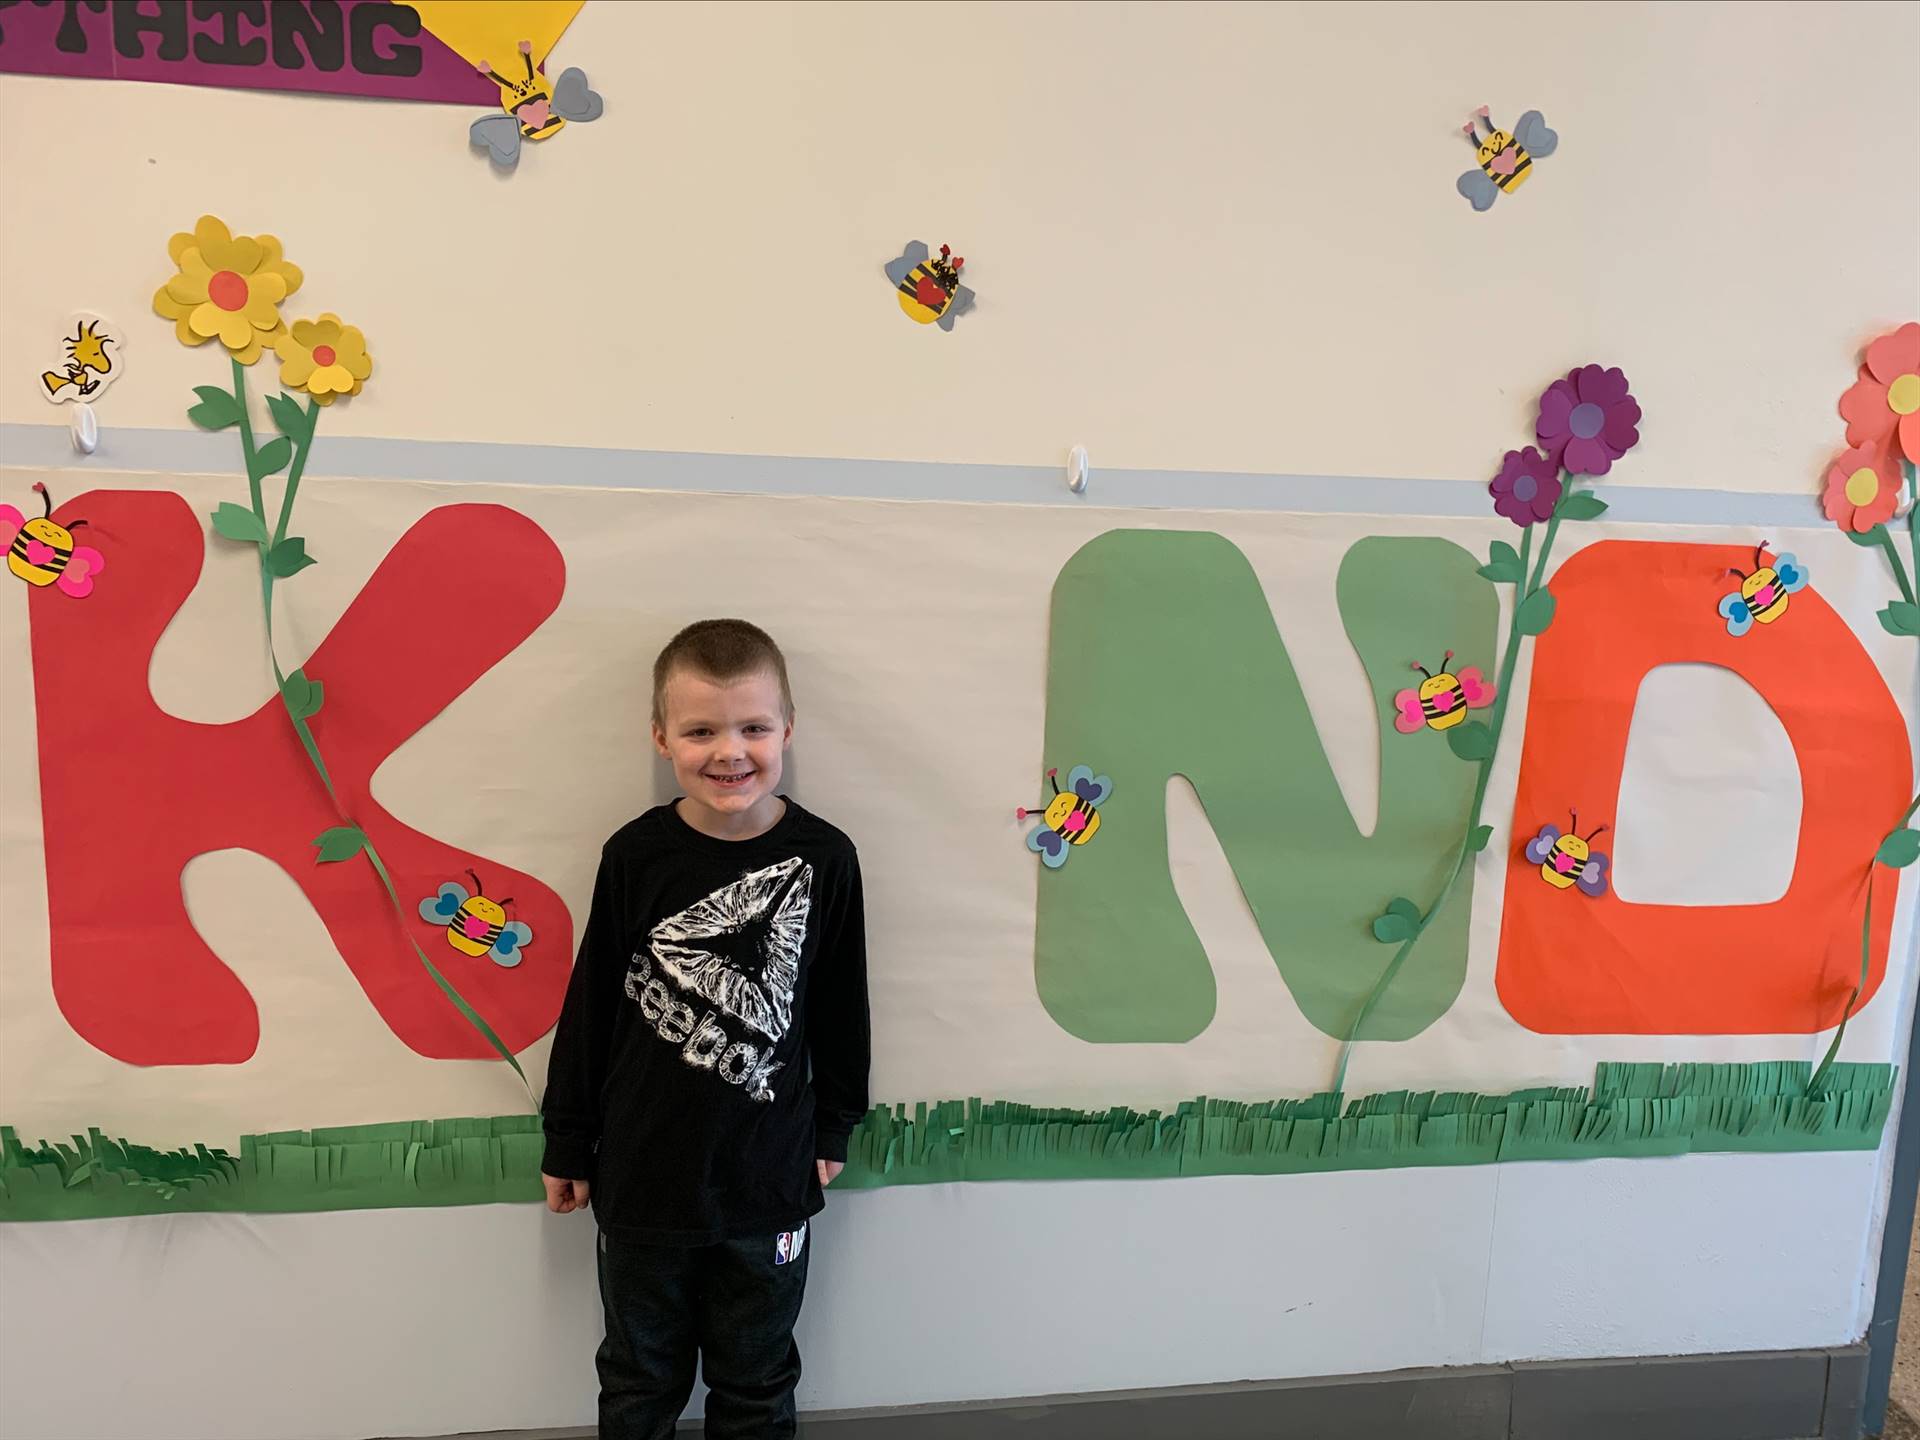 student is "I" in Kind poster